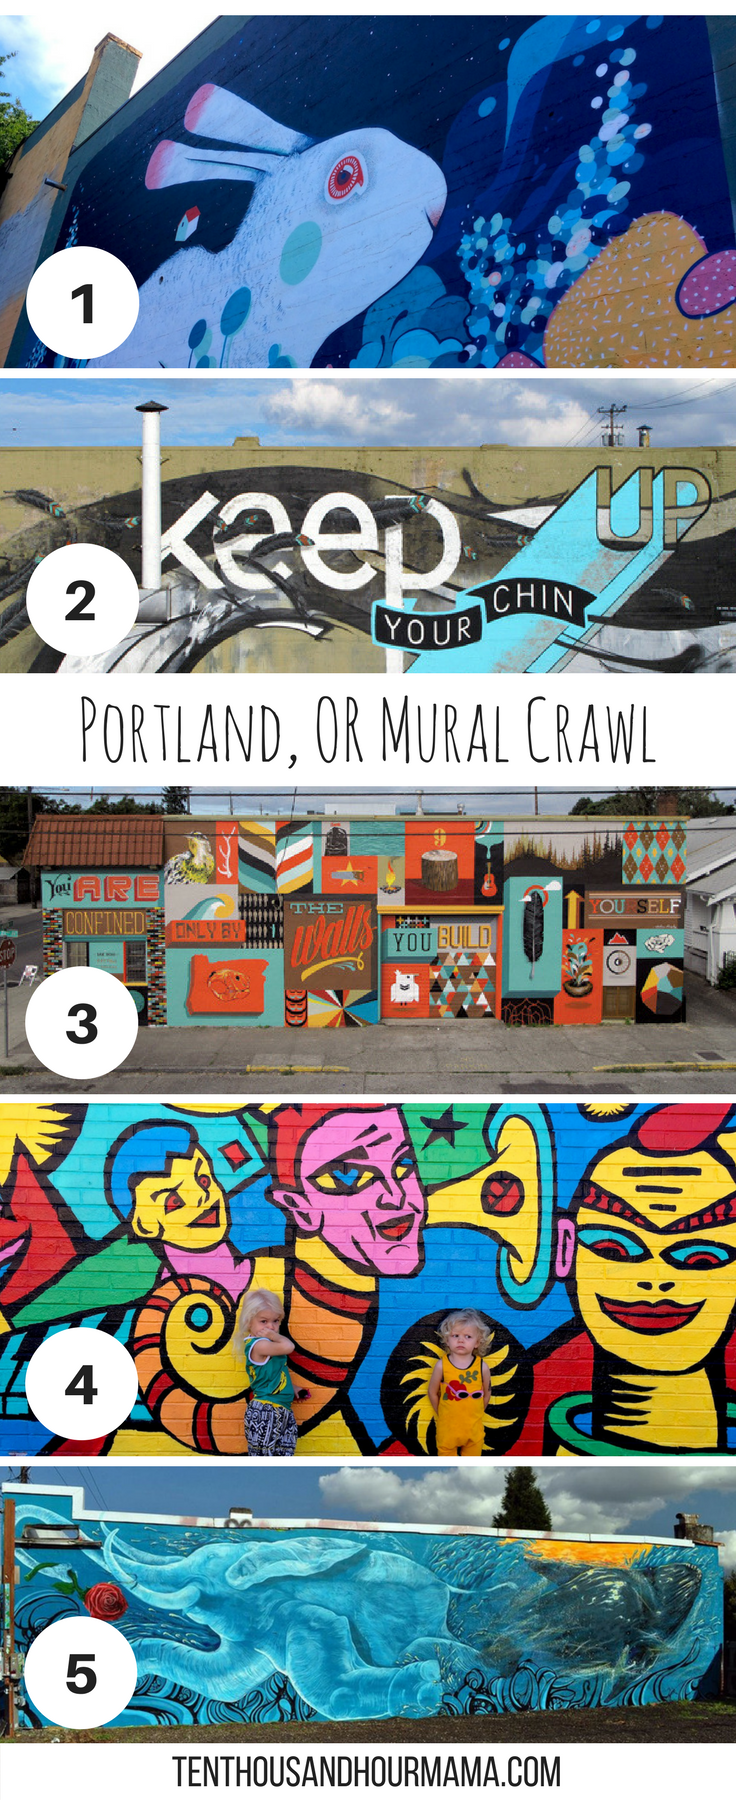 This mural crawl for kids in Portland, Oregon is a family friendly way to see street art—whether you're on a family travel vacation or you live in PDX! Ten Thousand Hour Mama